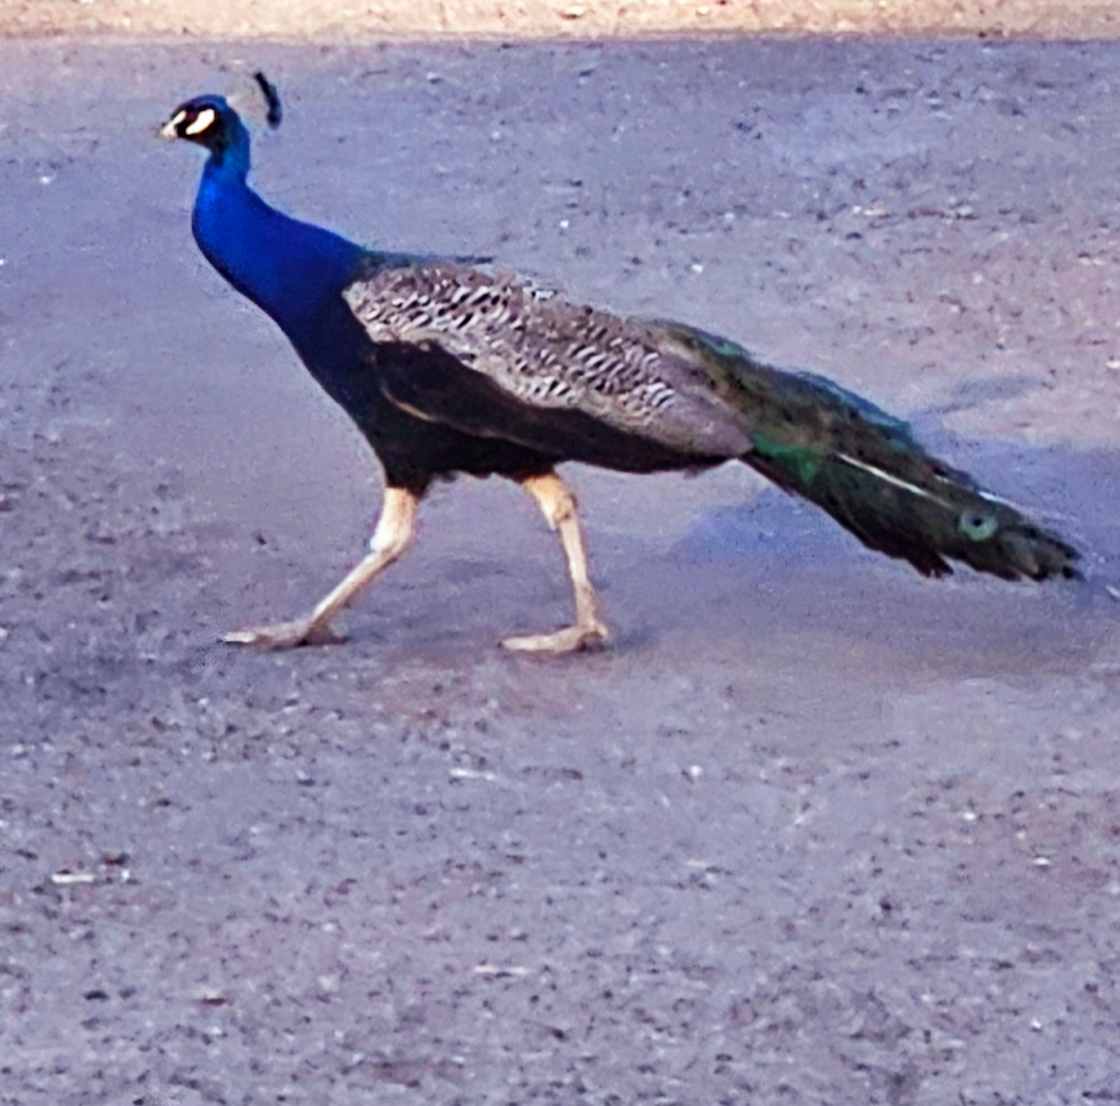 Wild peacocks near the town of Creswell